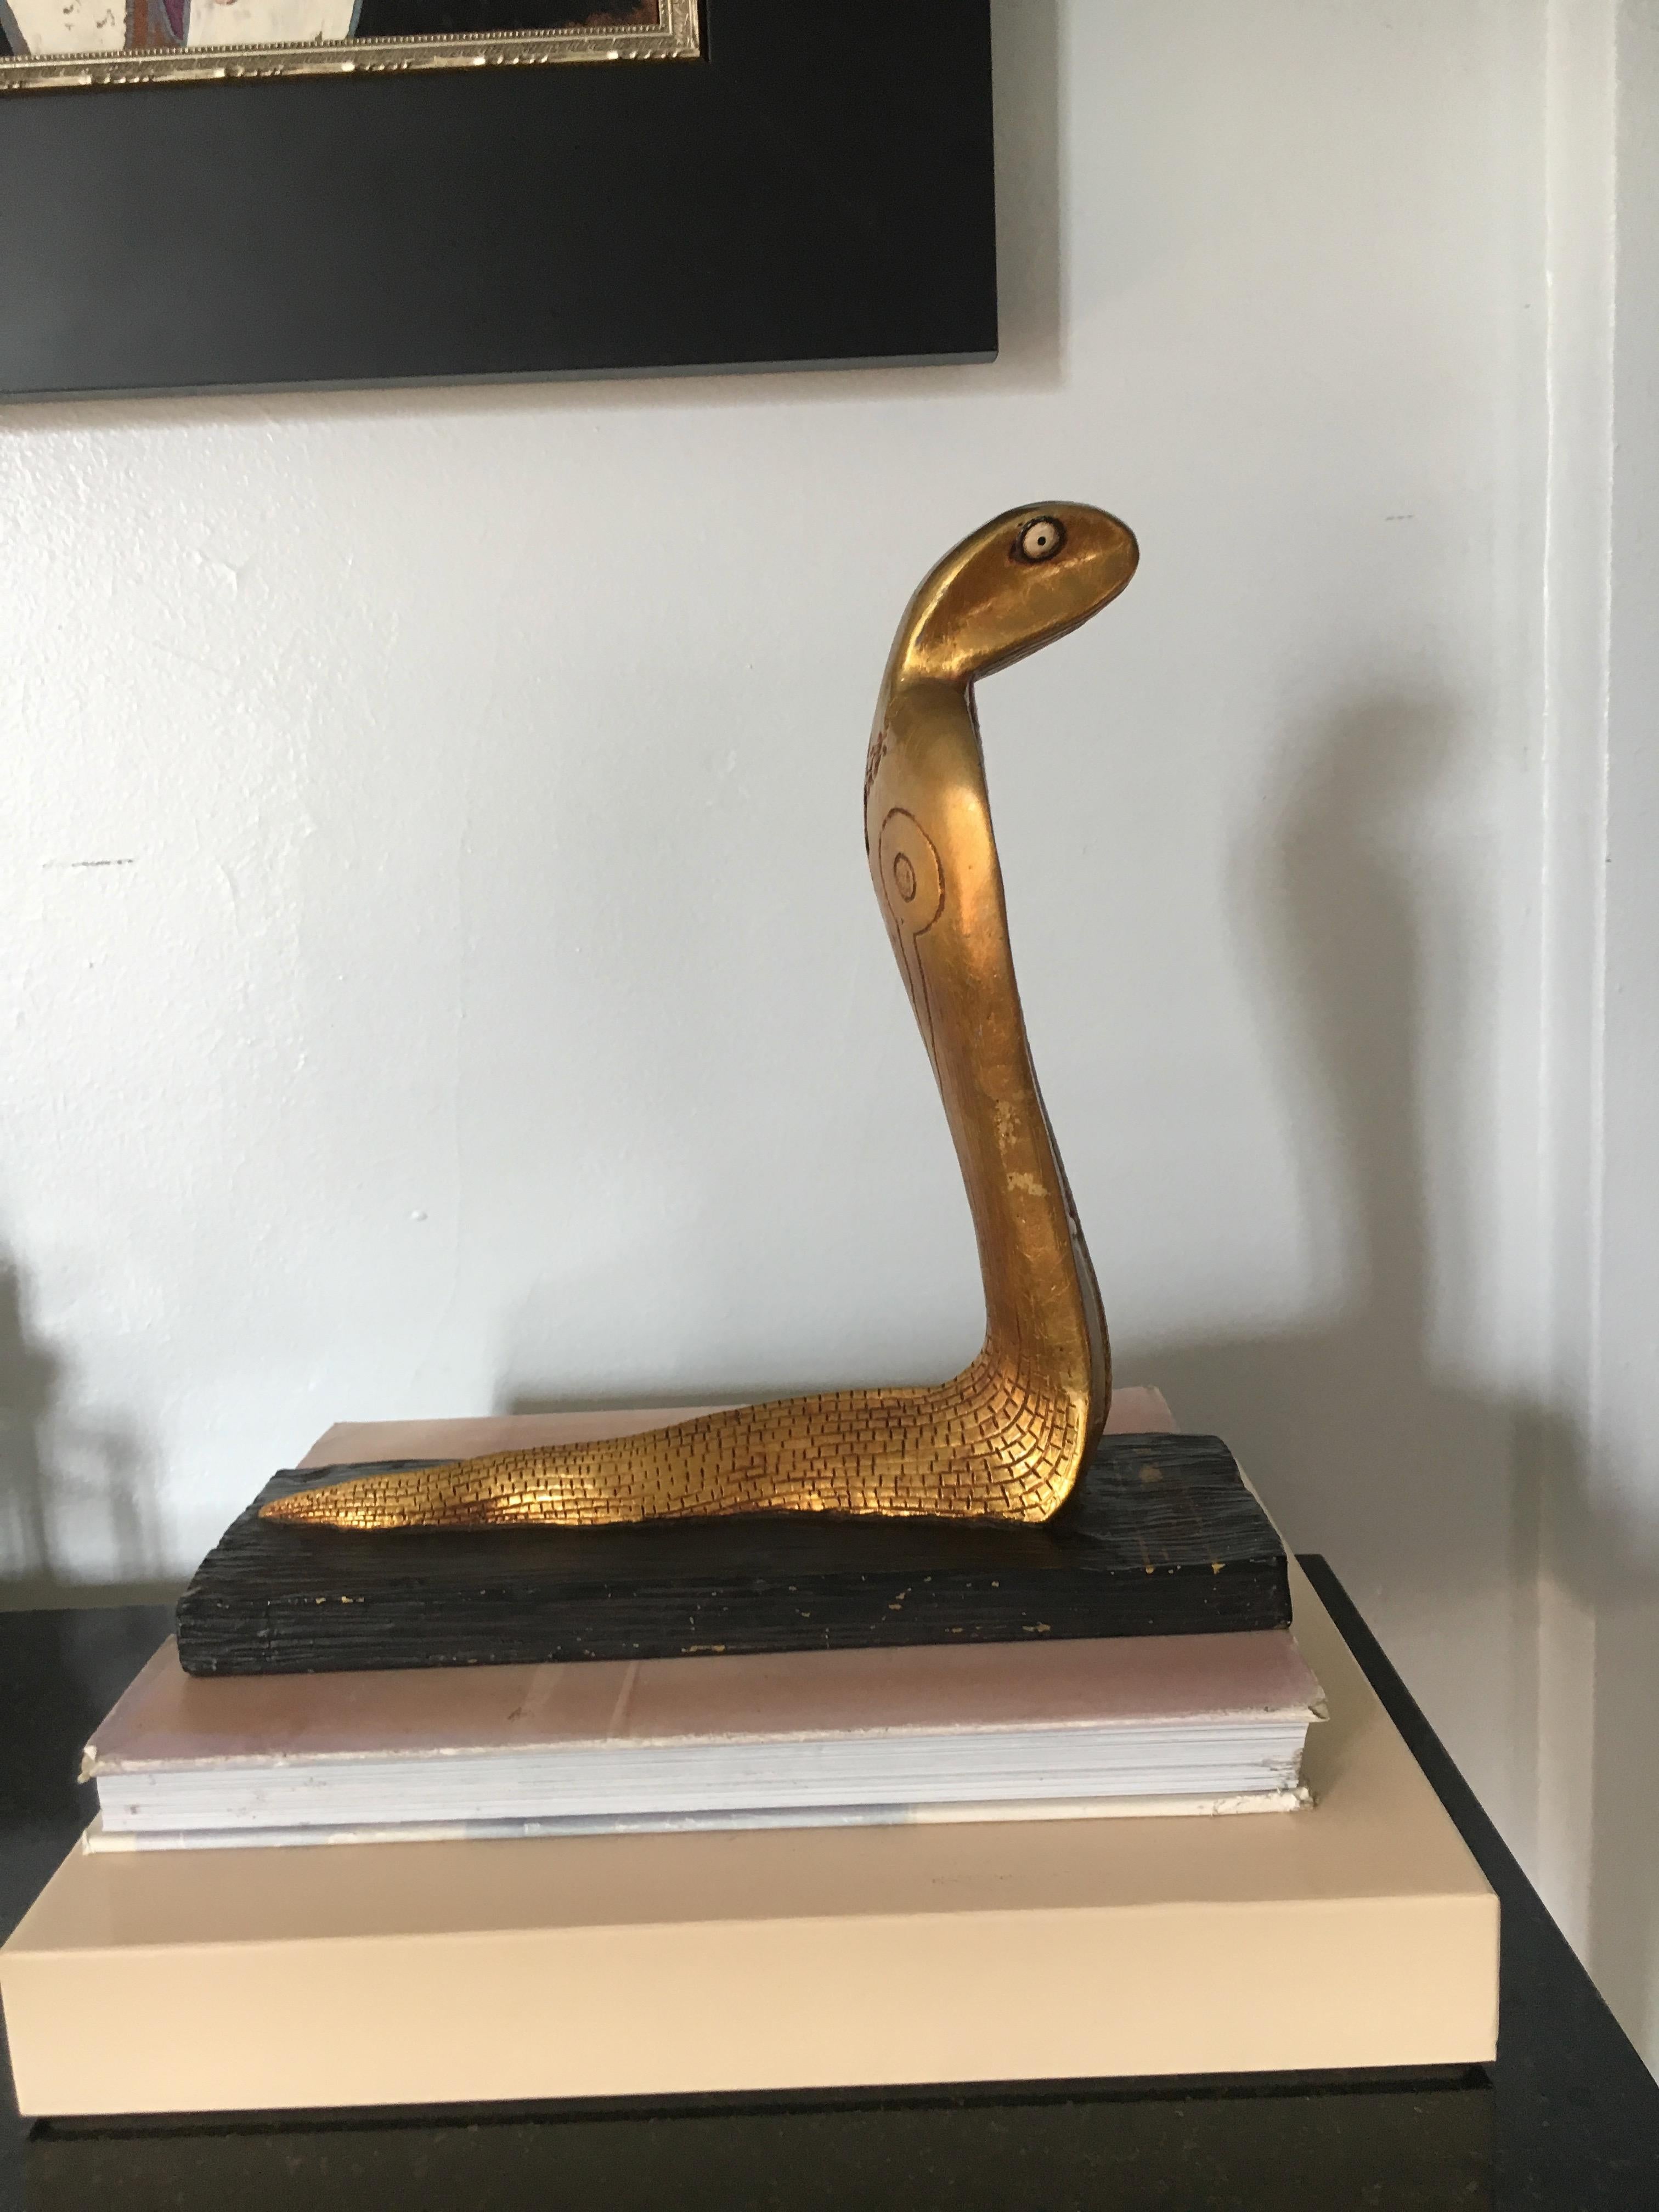 Gilt cobra sculpture bookend, a handsome decorate piece, the snake portion is likely plaster, or perhaps carved wood, with a striated wooden painted base, the piece has Egyptian hieroglyphics on the serpent and base.